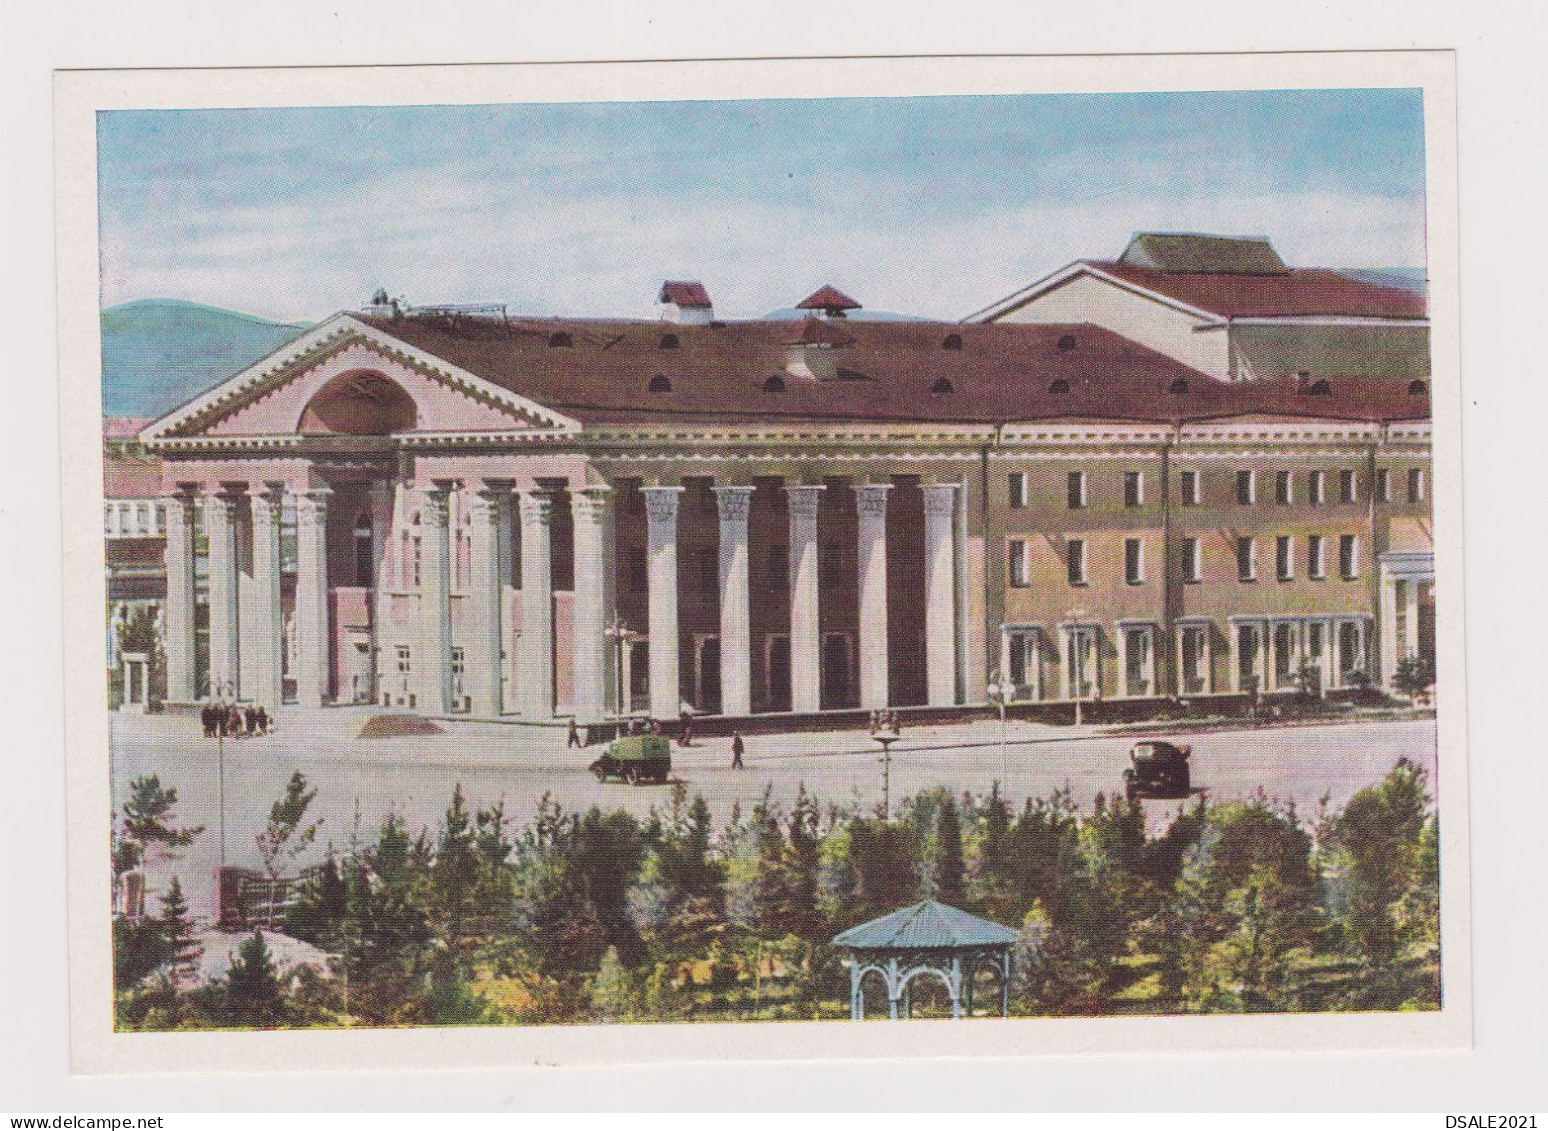 Mongolia Mongolei Mongolie Ulaanbaatar View Of State State Musical-Dramatic Theatre 1960s Soviet USSR Postcard (66637) - Mongolie